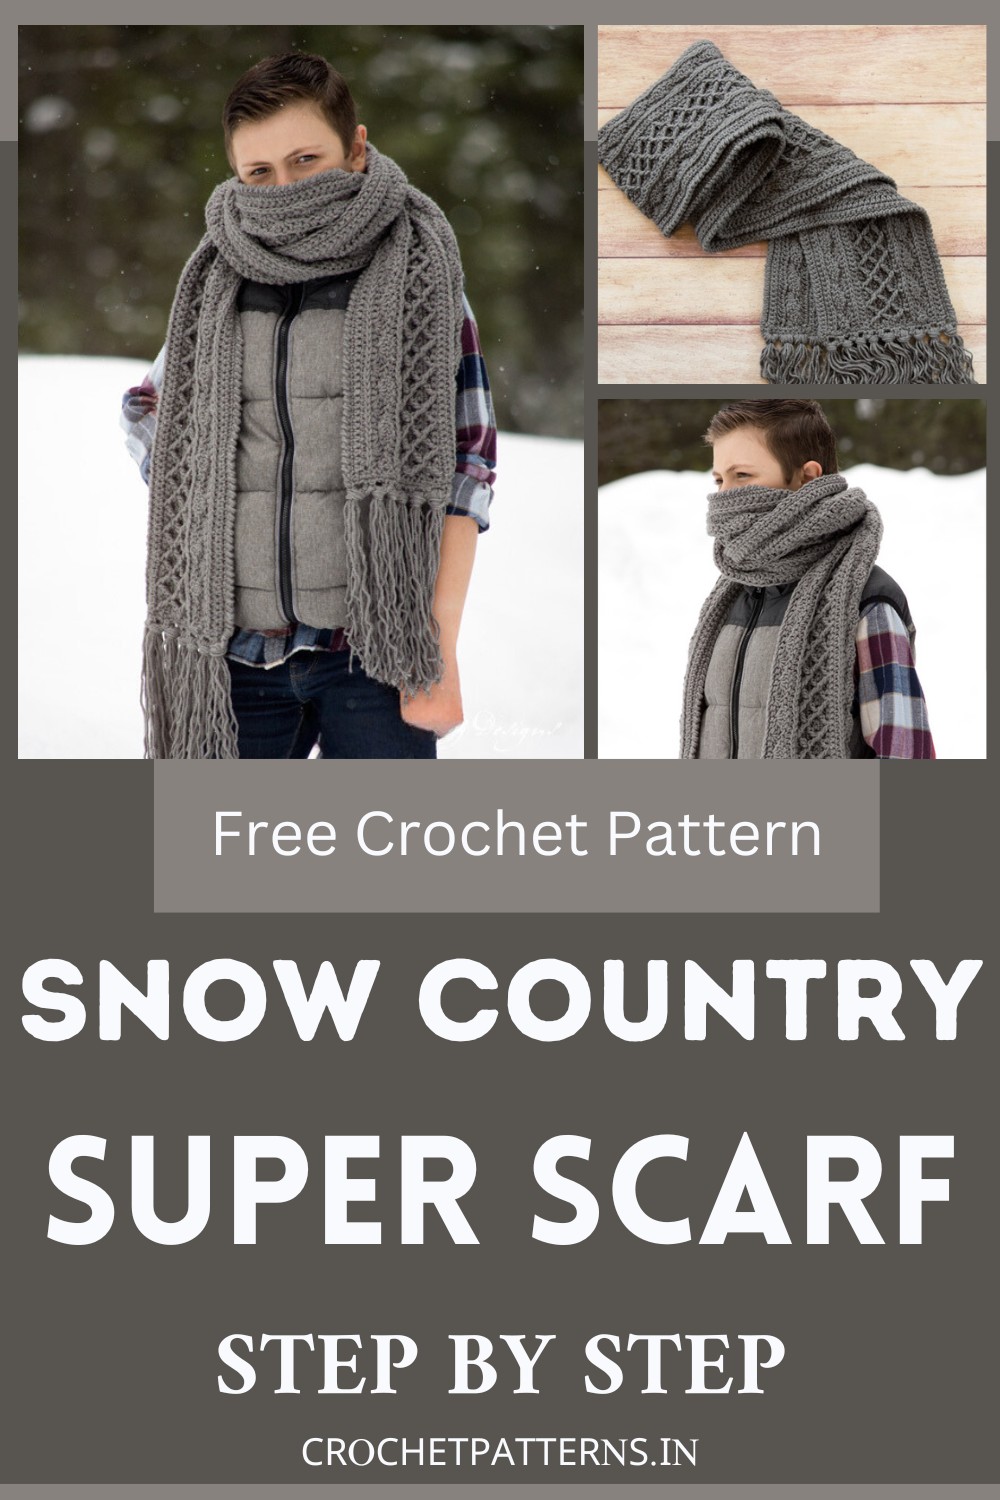 Crochet Snow Country Super Scarf